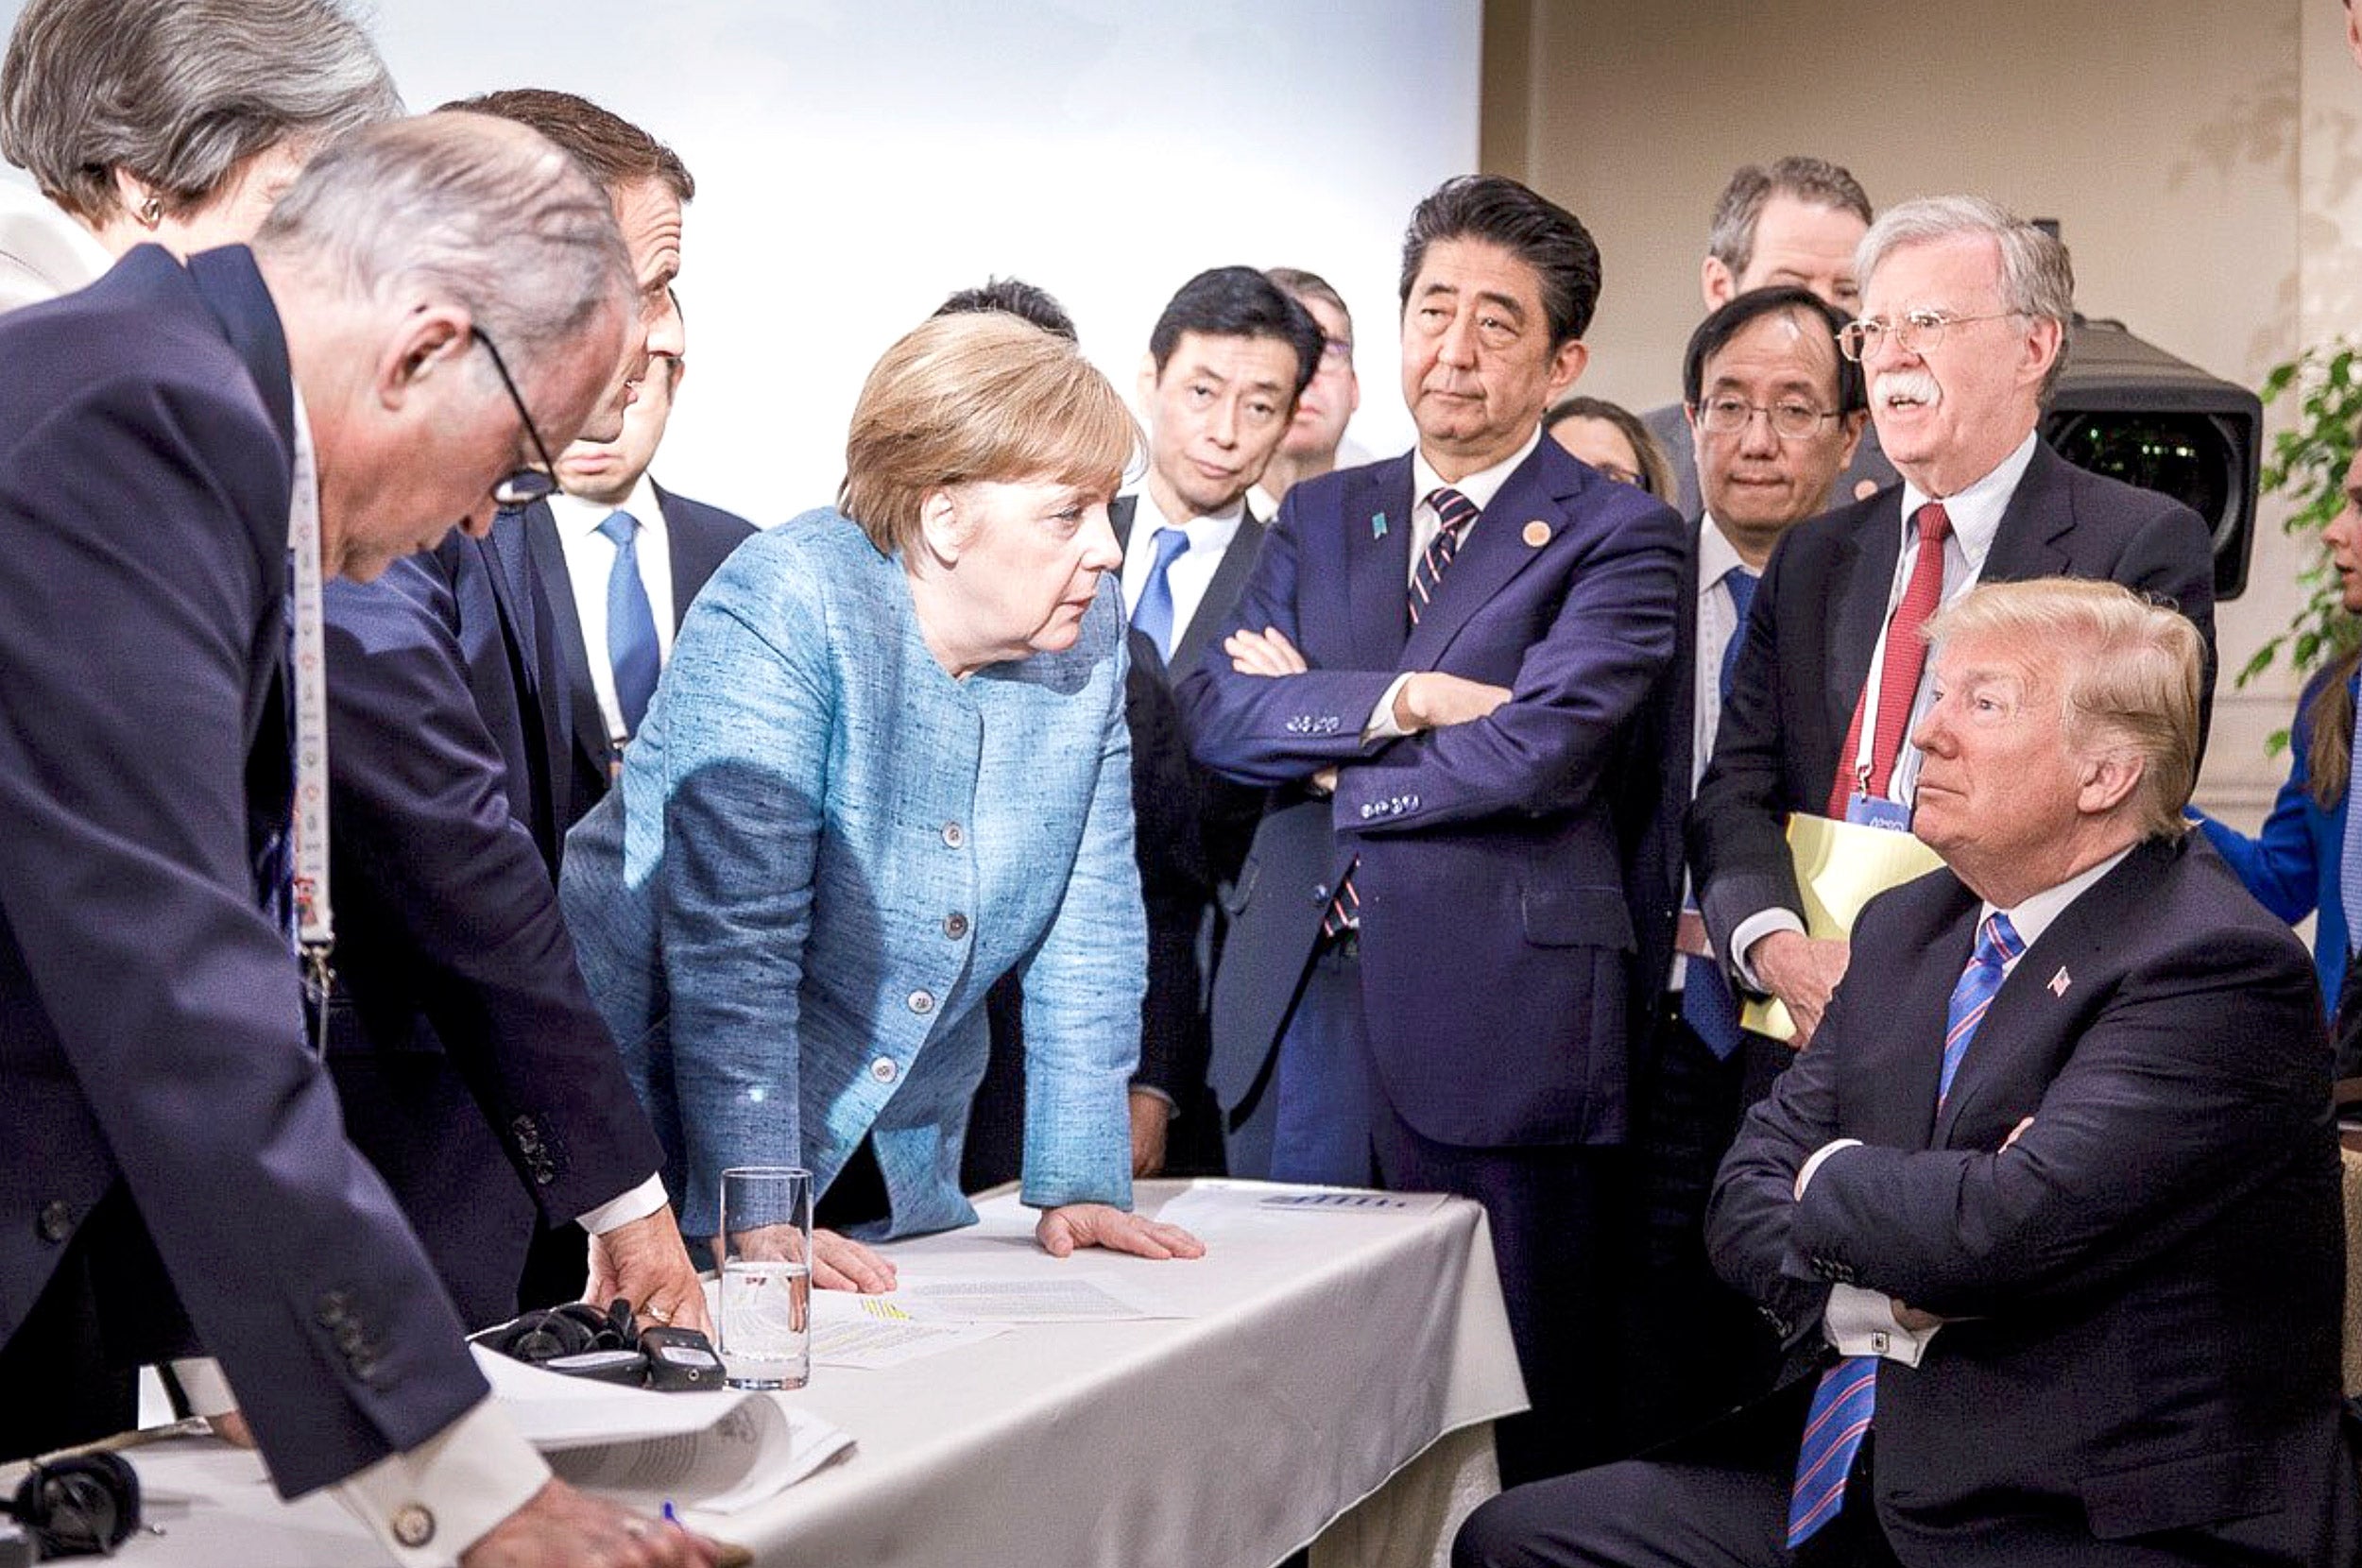 Angela Merkel, surrounded by world leaders at G& summit in 2018, leans over table to face Donald Trump, whose arms are folded.